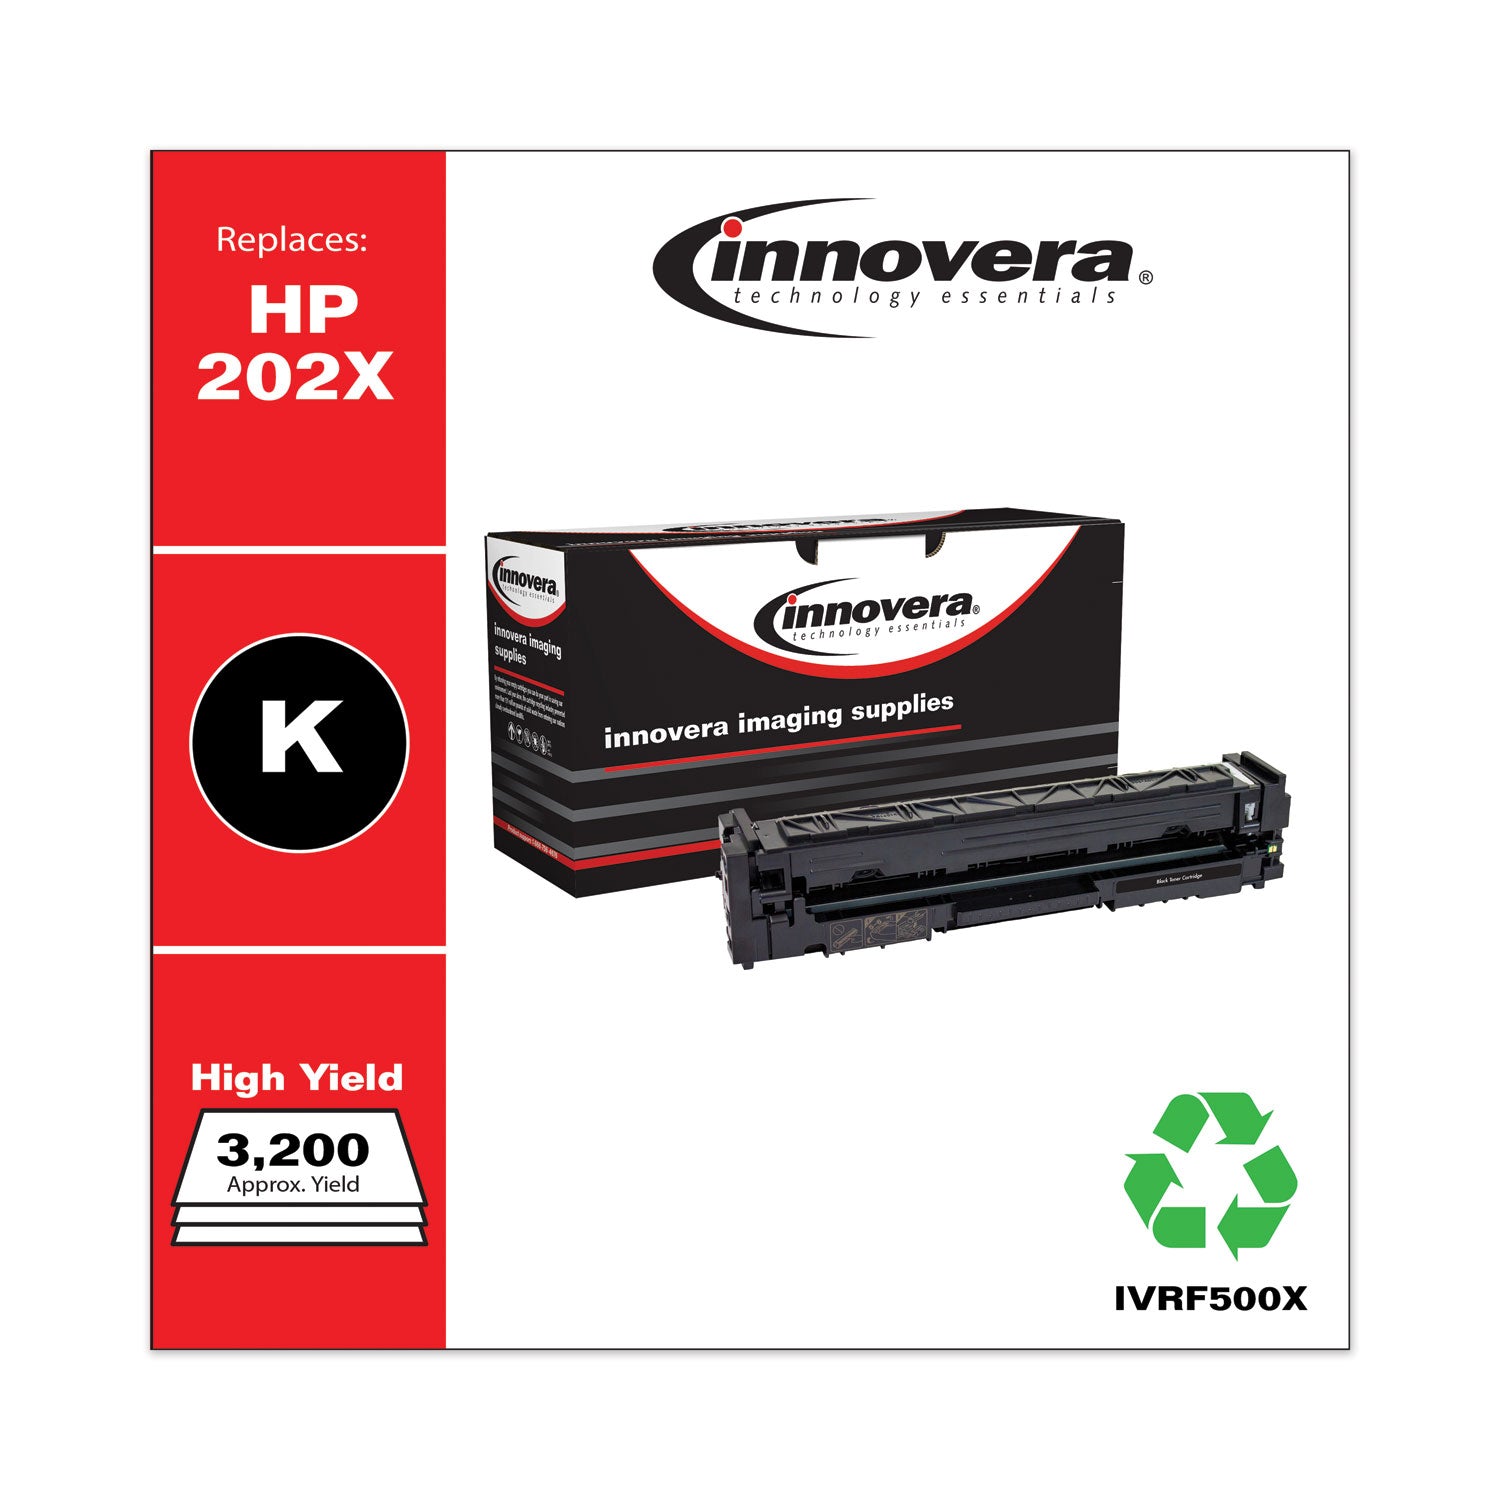 remanufactured-black-high-yield-toner-replacement-for-202x-cf500x-3200-page-yield-ships-in-1-3-business-days_ivrf500x - 2